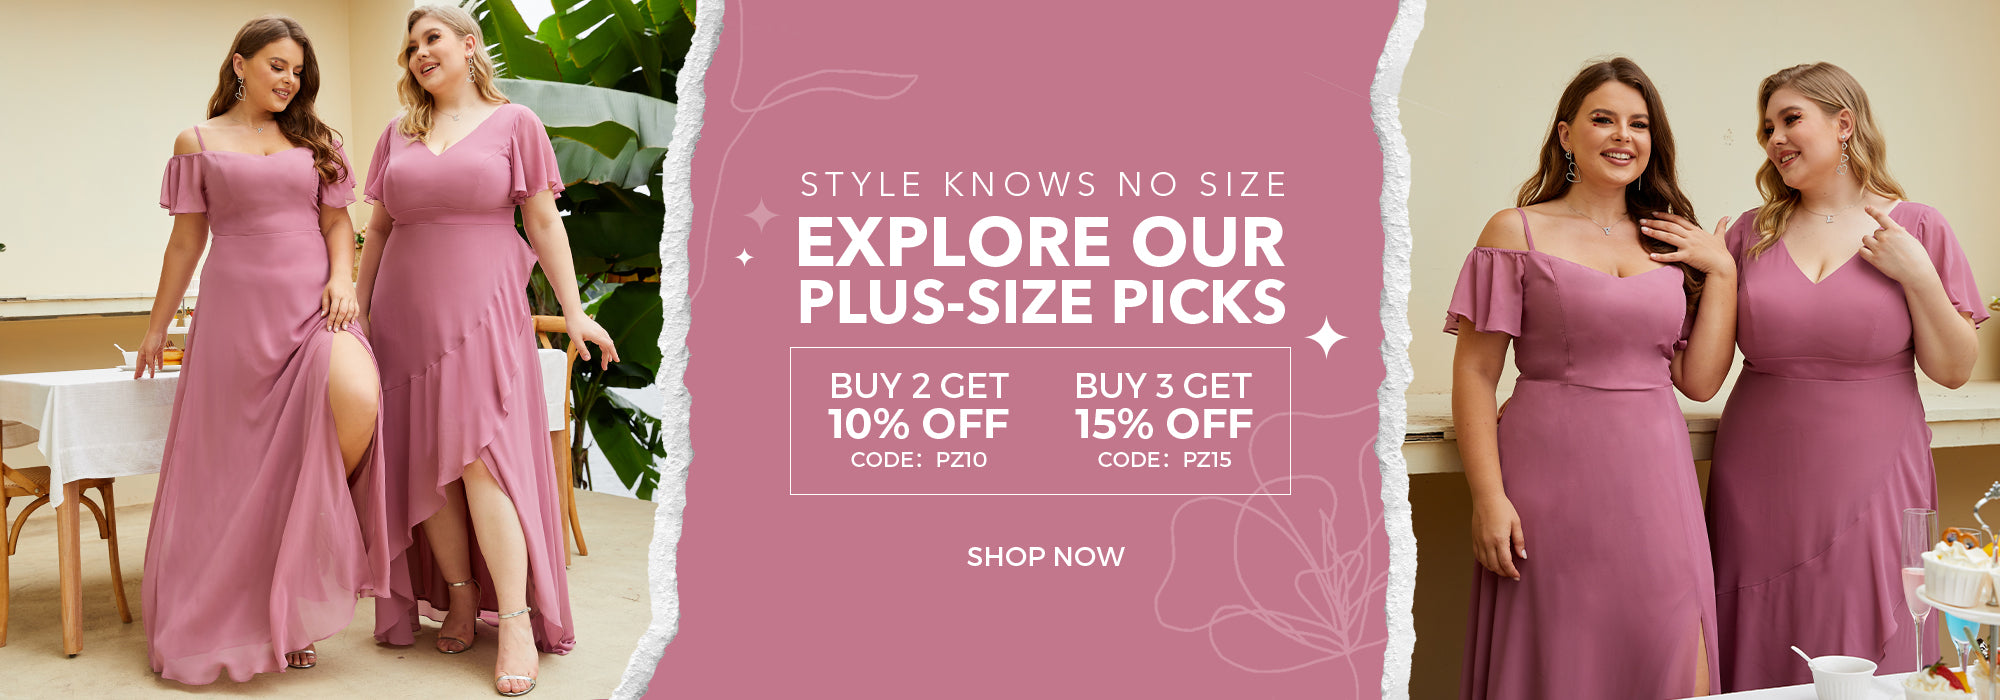 Ever Pretty - Buy 3 Get 15% off!